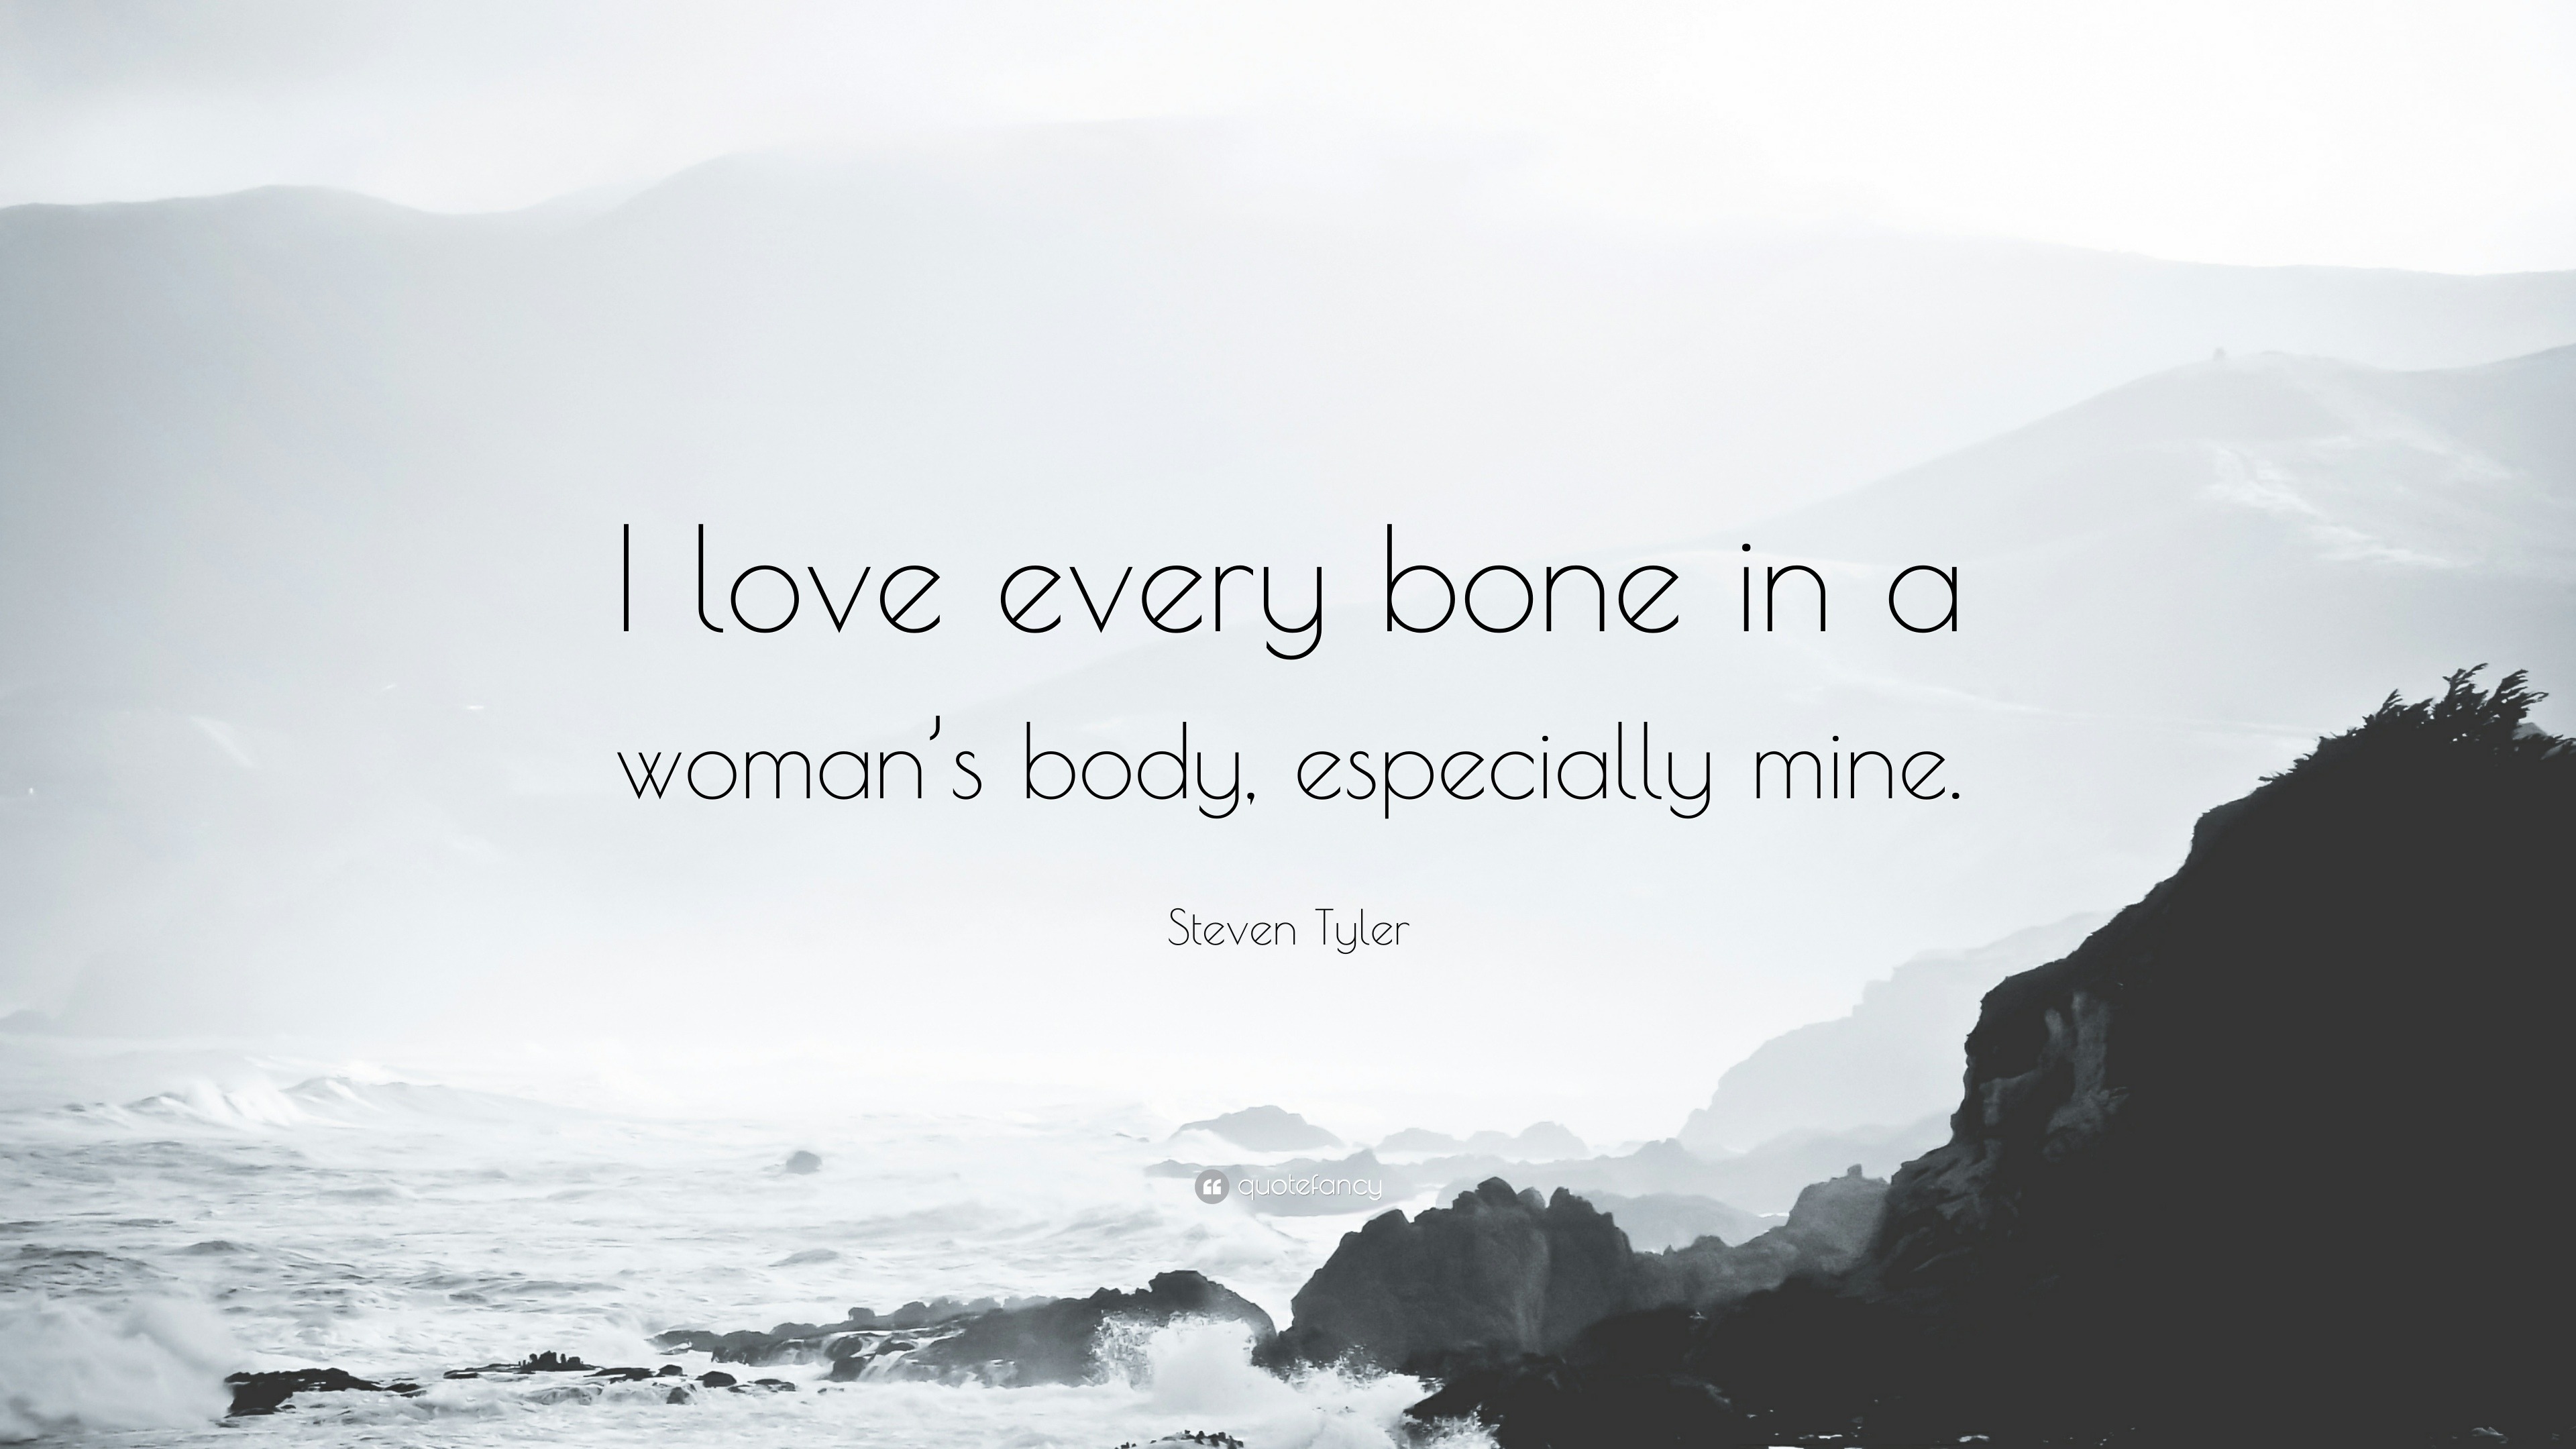 I LOVE EVERY BONE IN YOUR BODY